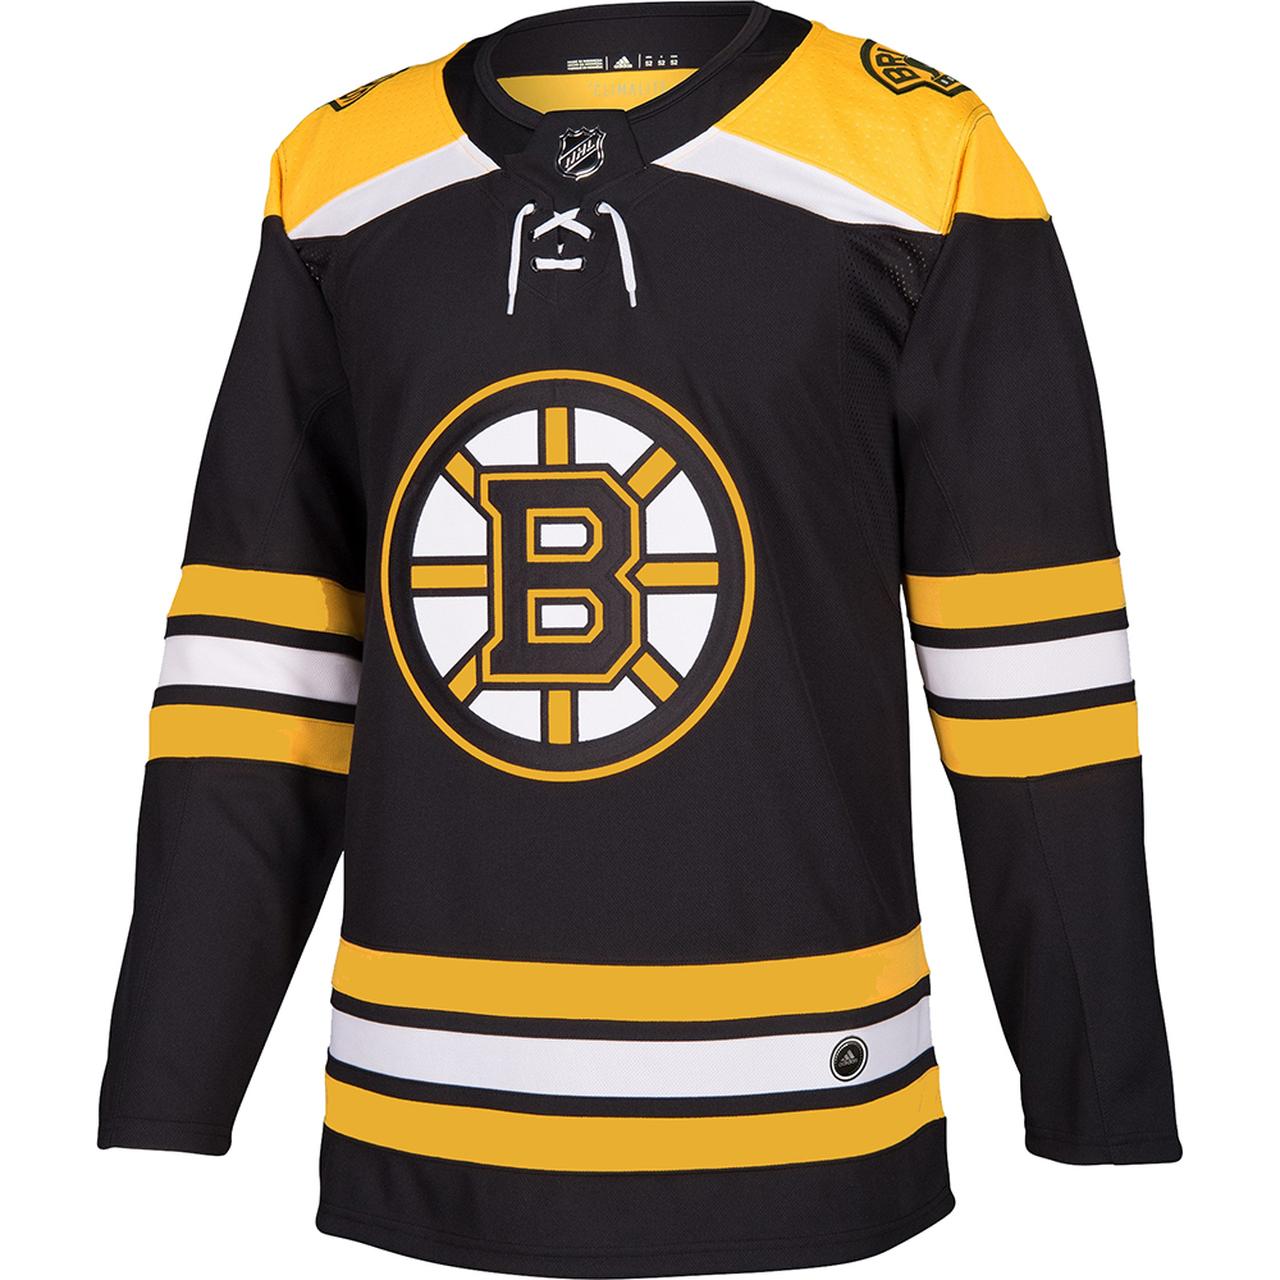 adidas Authentic NHL Pro Hockey Jersey for $67.50 Shipped